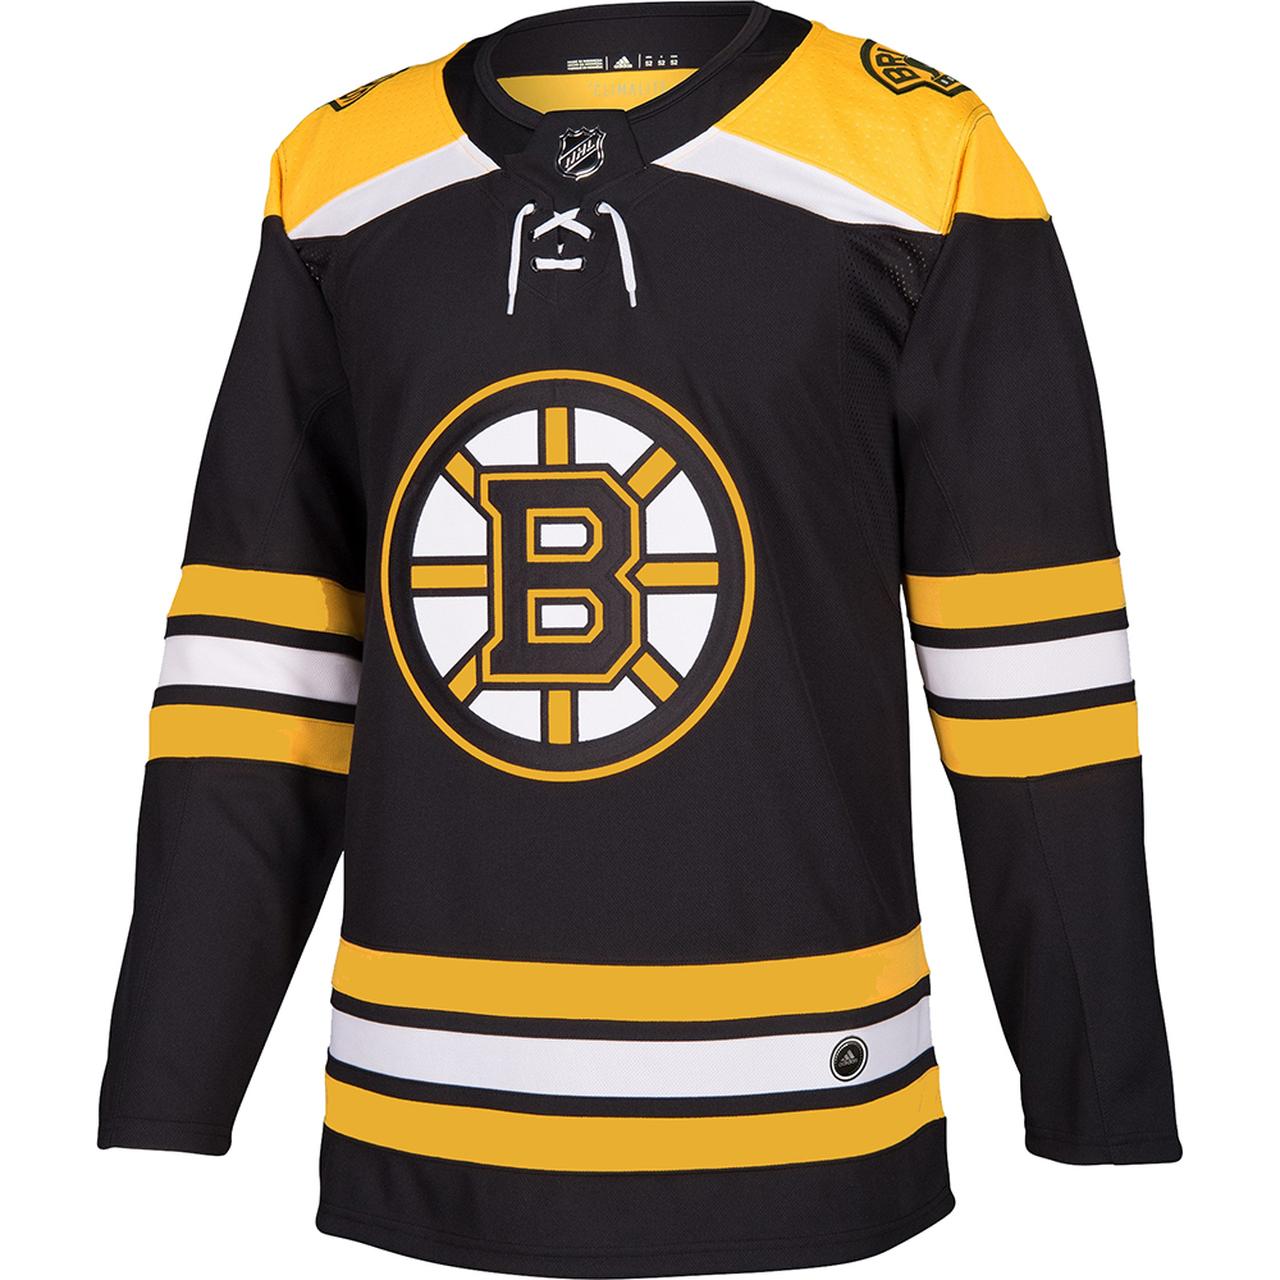 adidas Authentic NHL Pro Hockey Jersey for $67.50 Shipped